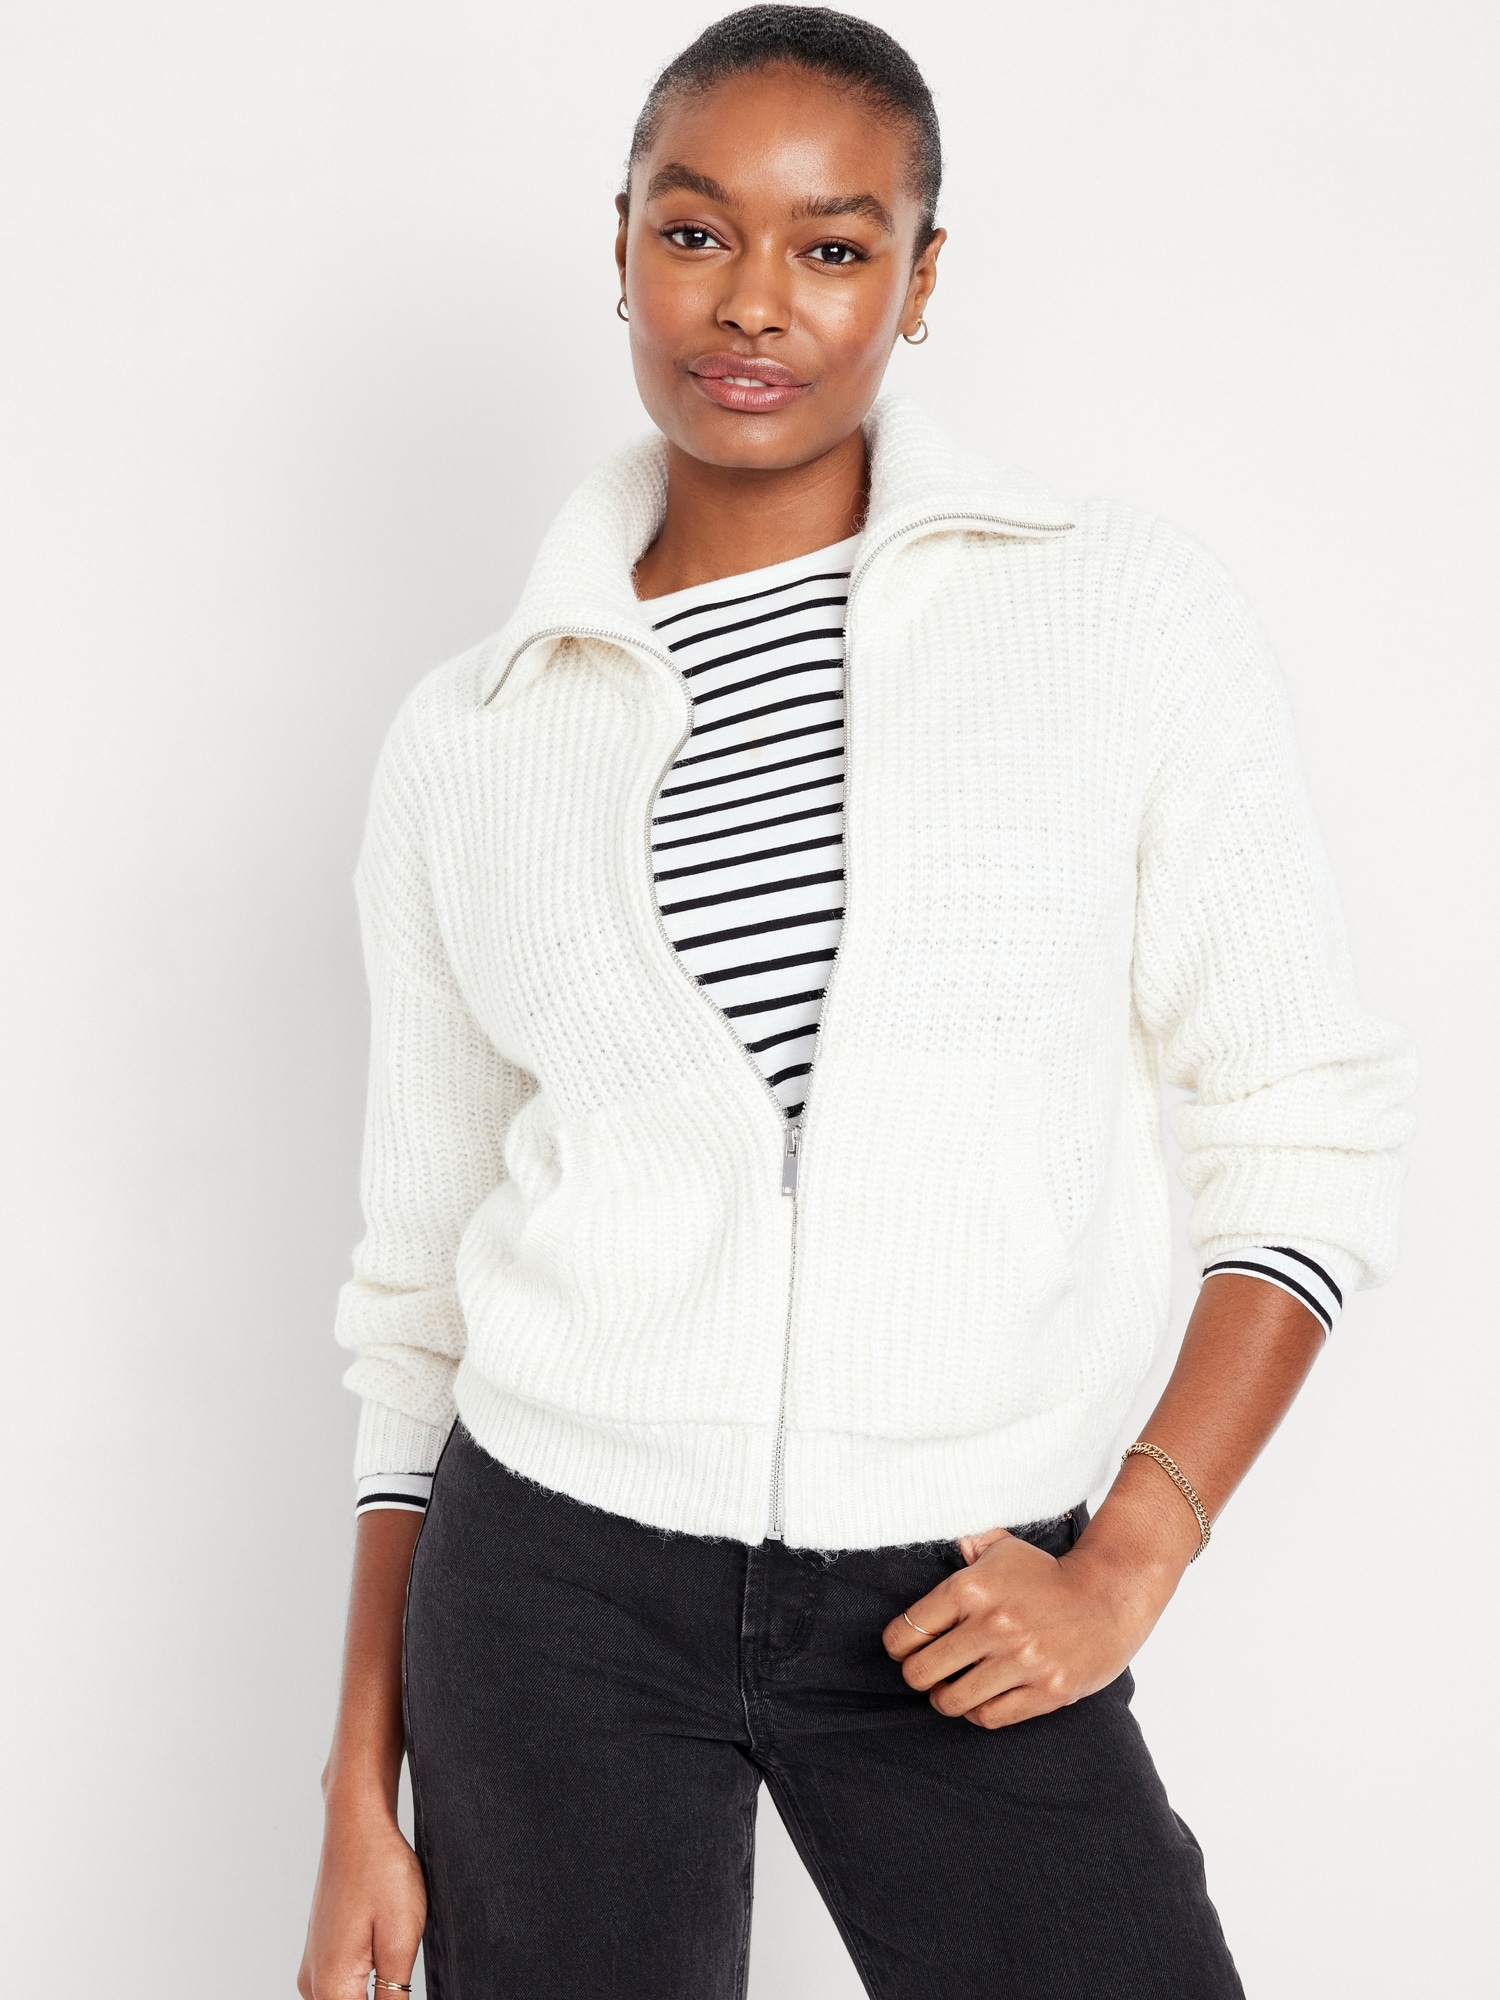 Cardigan Sweaters, Cardigans for Women